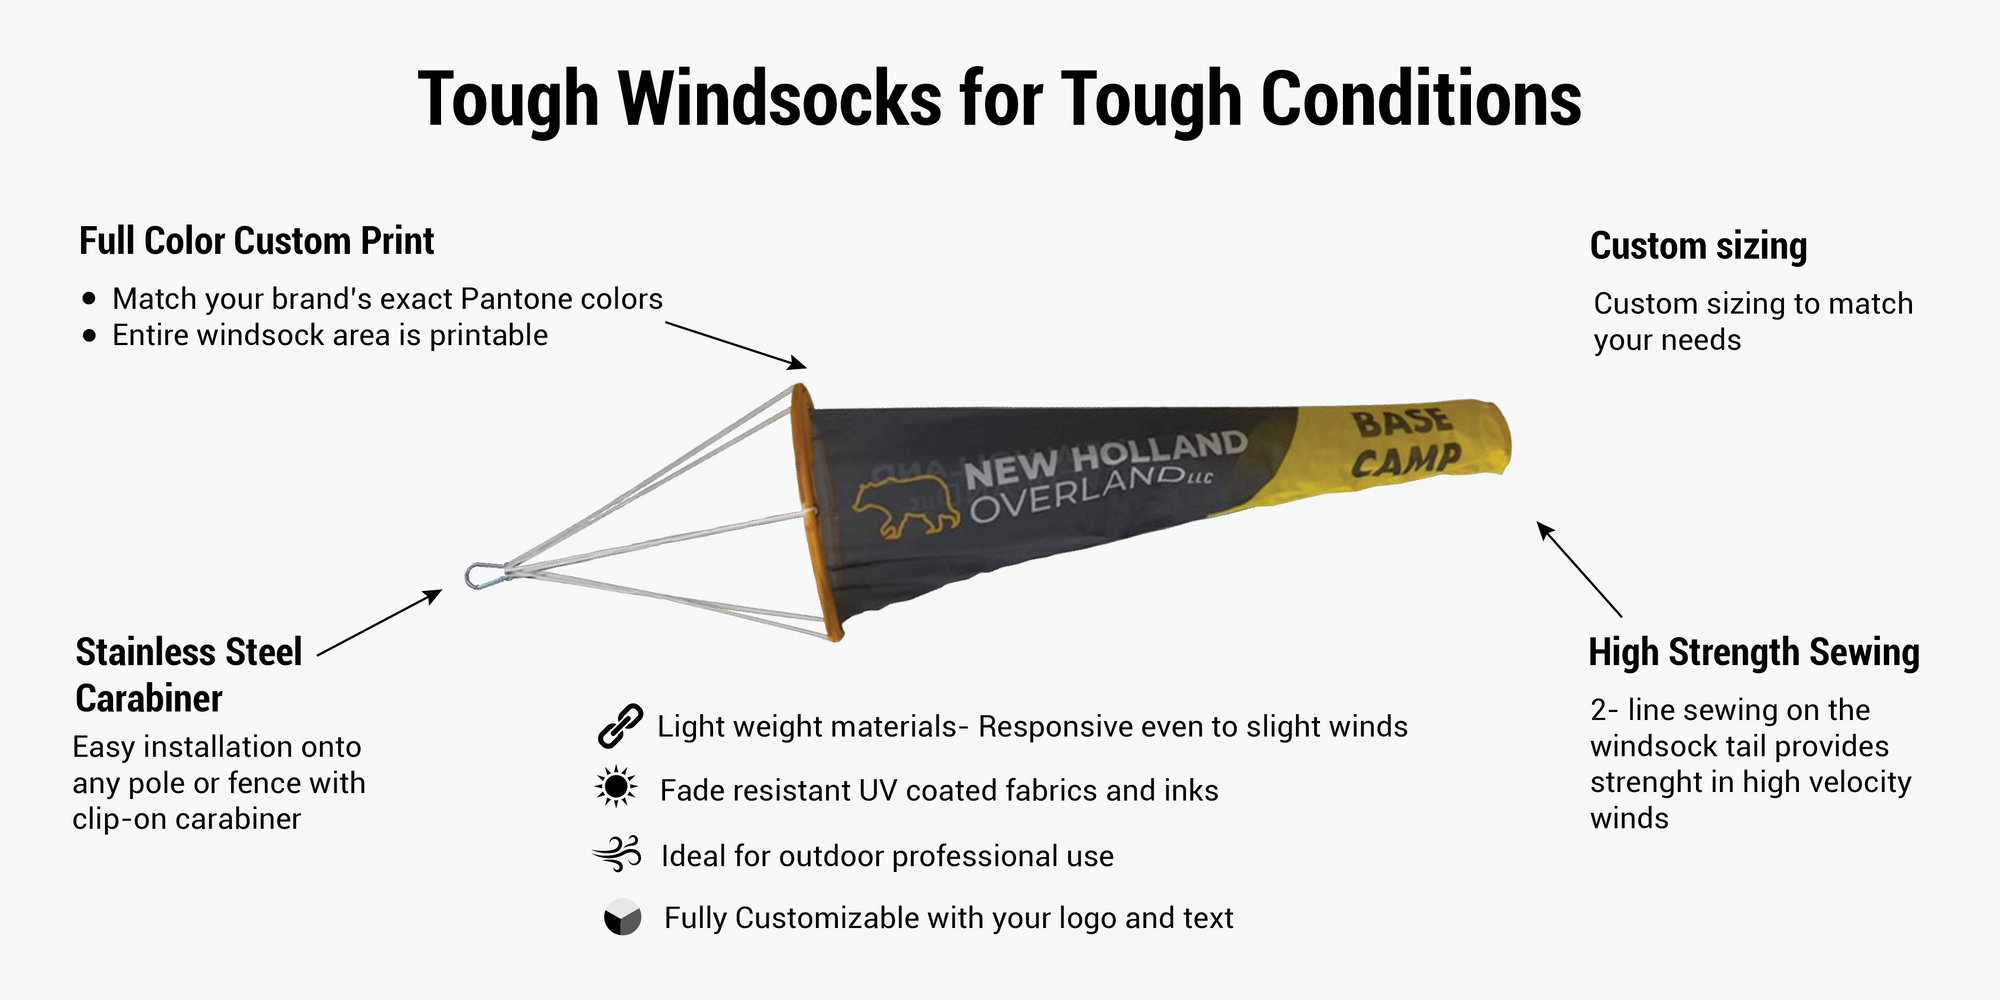 custom printed tailor made lightweight windsock infographic for sport, recreational and industrial use. full color printed